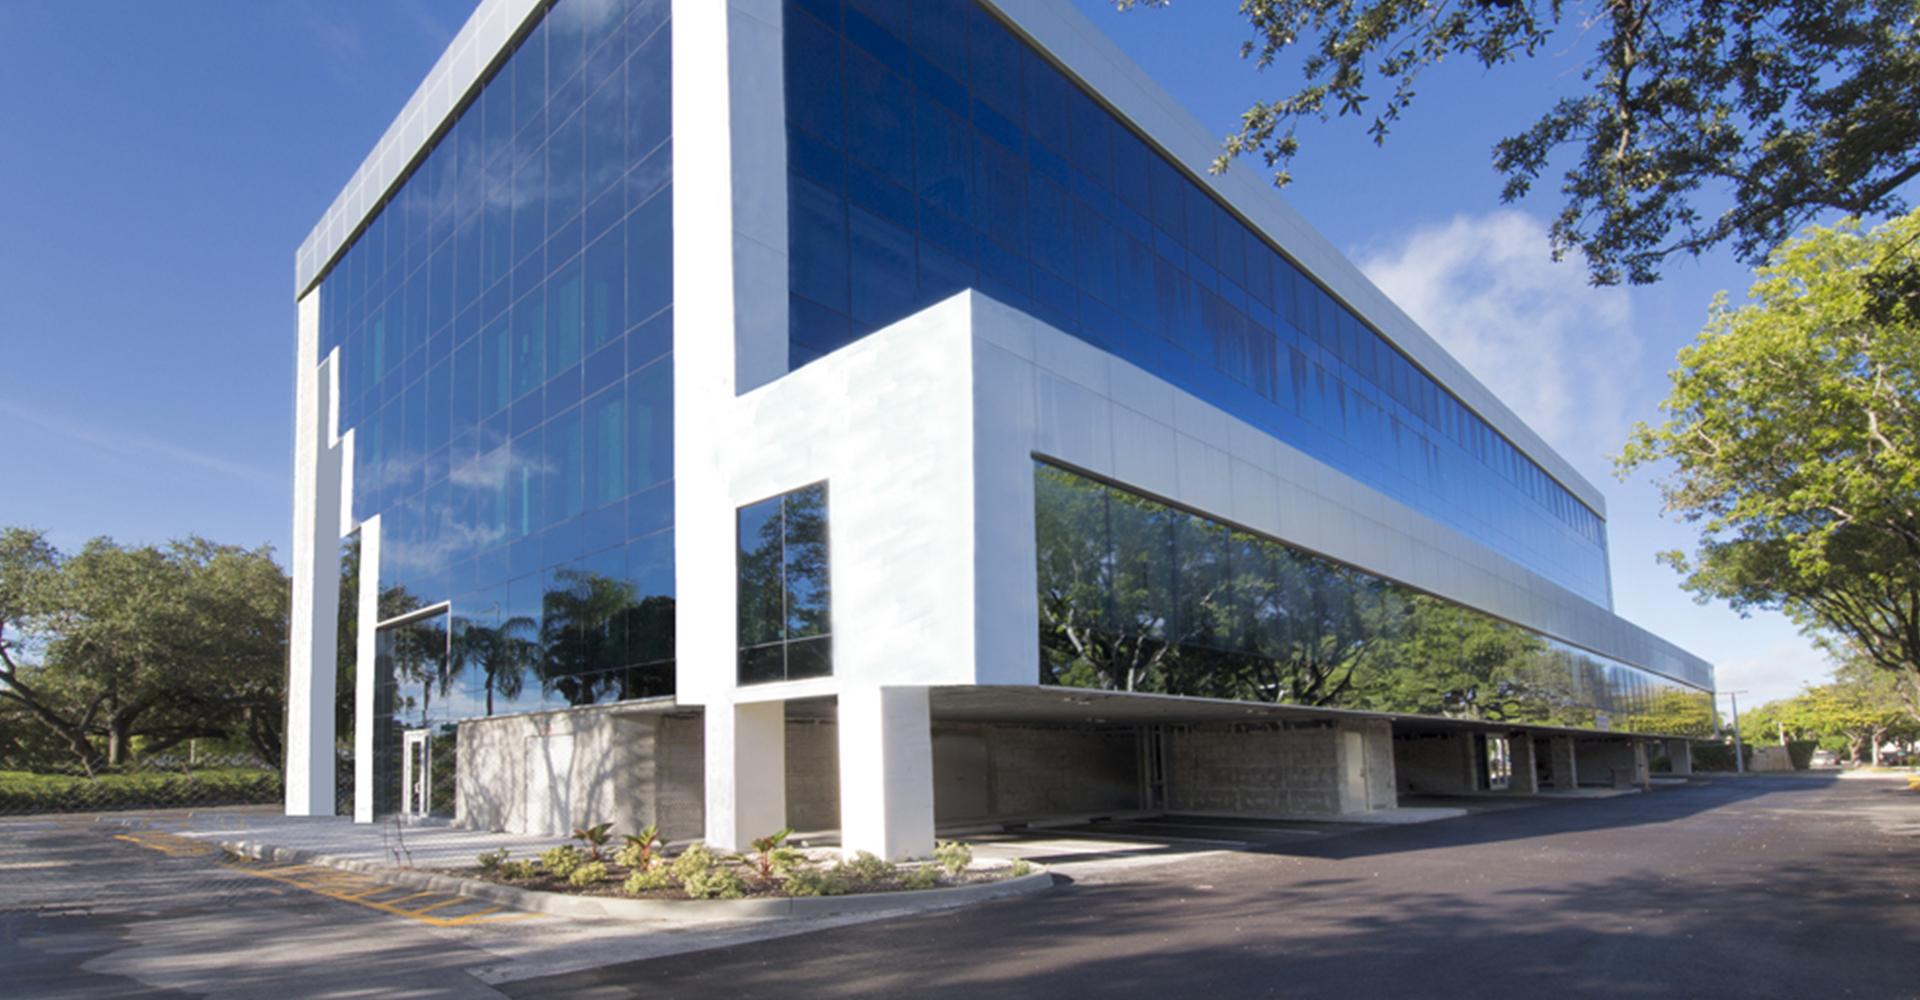 Emerald Hills Executive Plaza by Holland Engineering